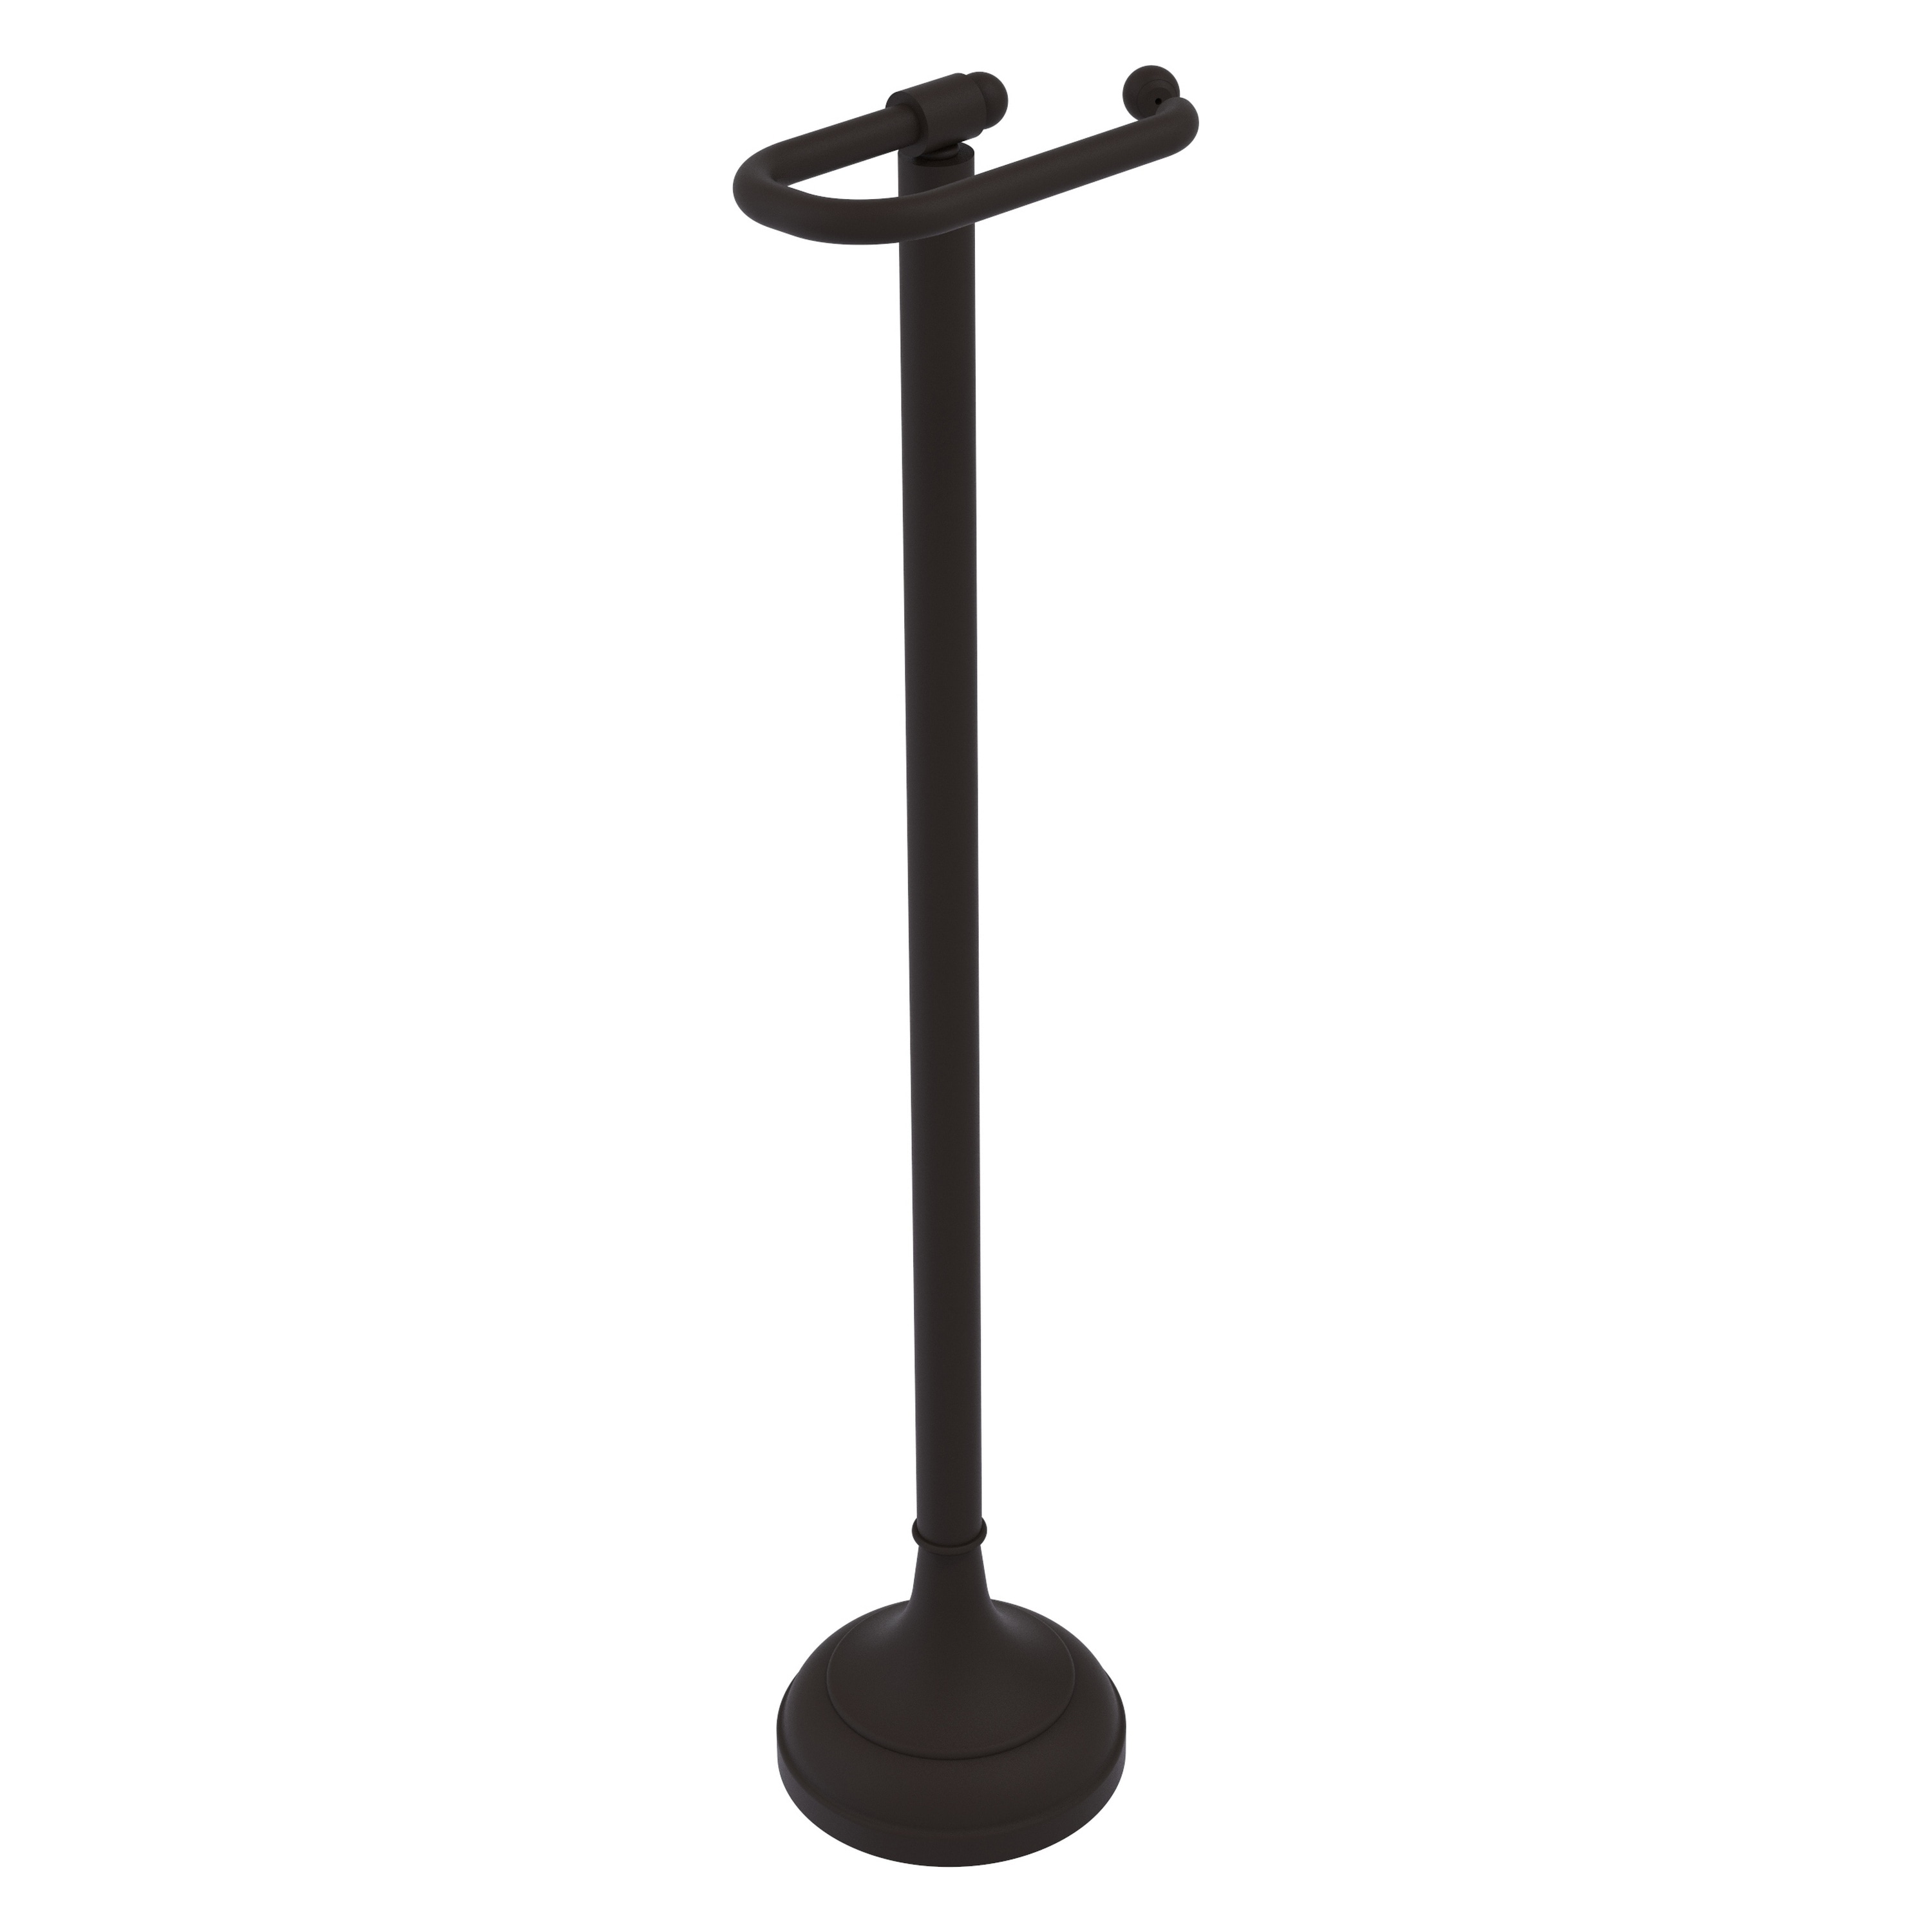 Kingston Brass CC8105 Claremont Freestanding Toilet Paper Stand, Oil Rubbed Bronze